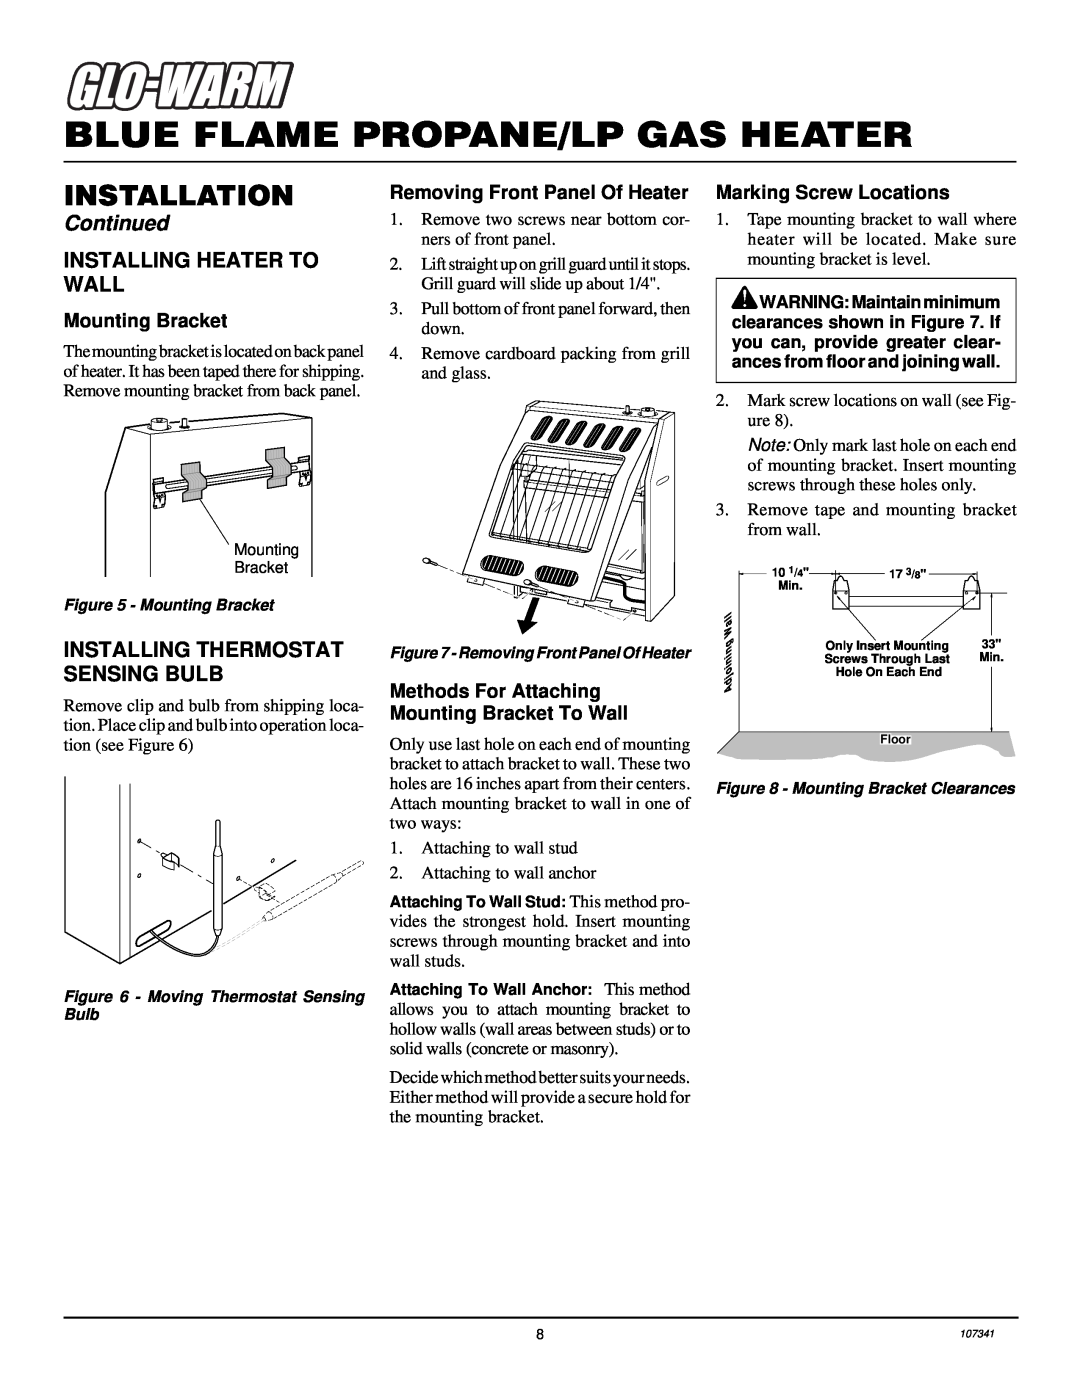 Desa FGHS30LPB Installing Heater To Wall, Installing Thermostat Sensing Bulb, Mounting Bracket, Marking Screw Locations 